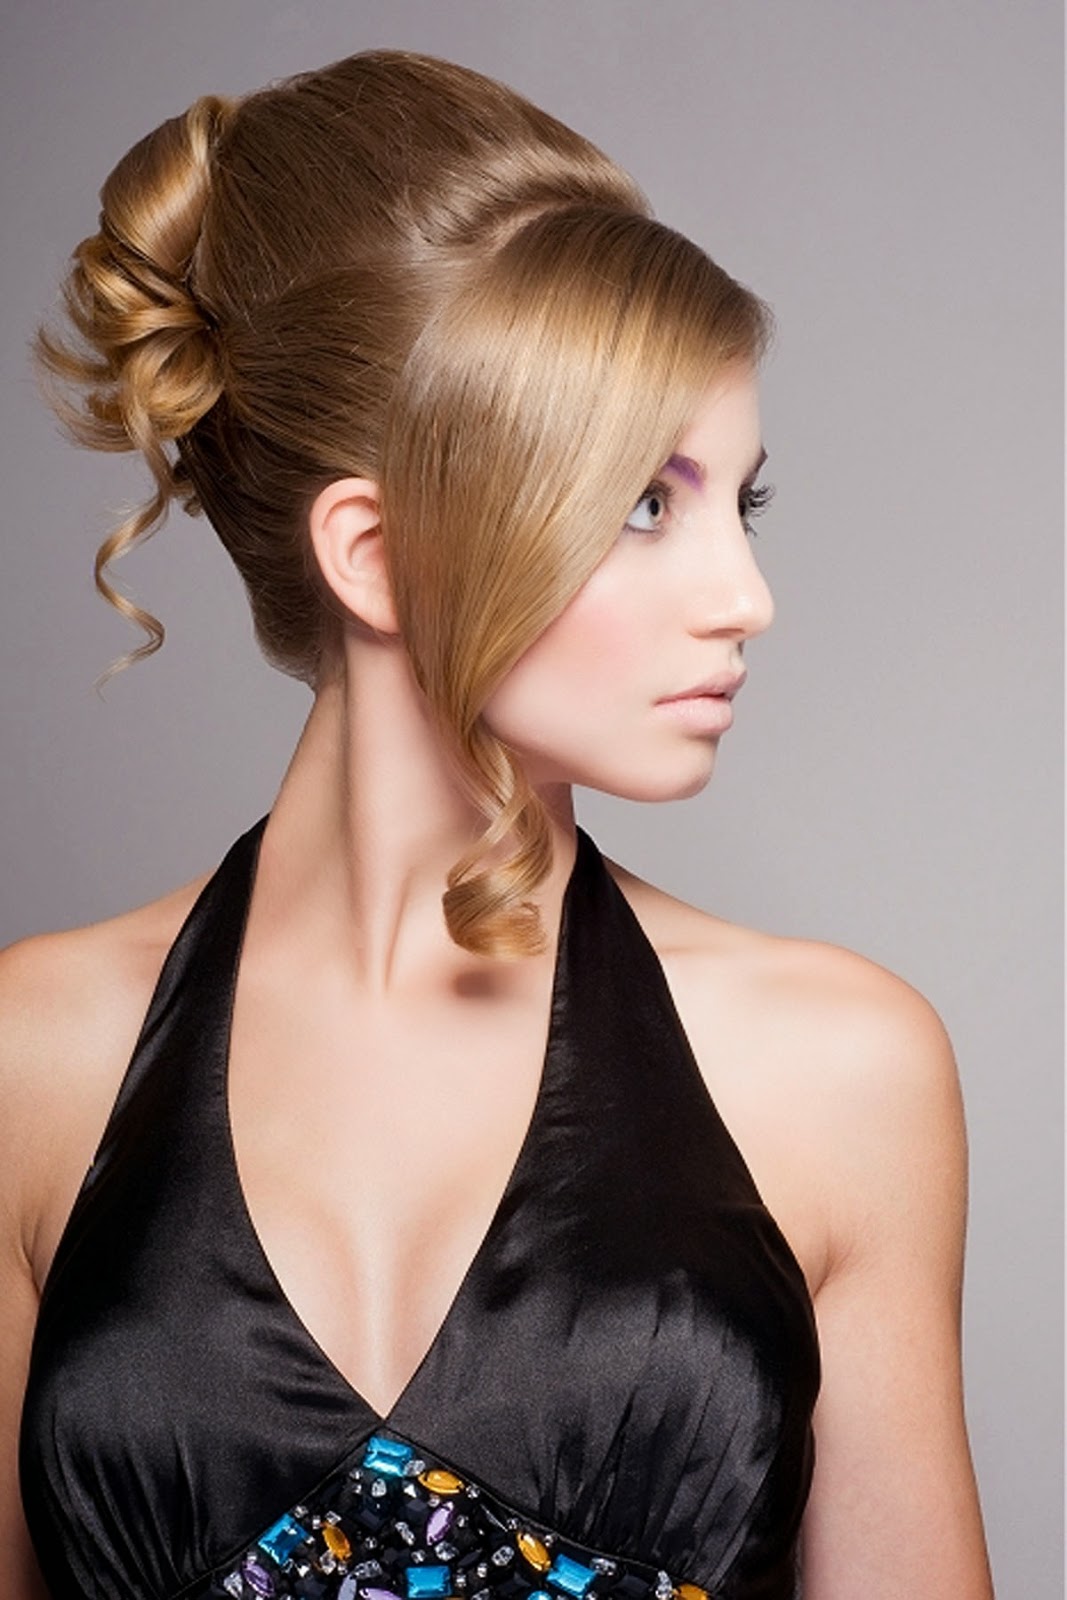 Top 10 Image Of Pinterest Hairstyles For Long Hair